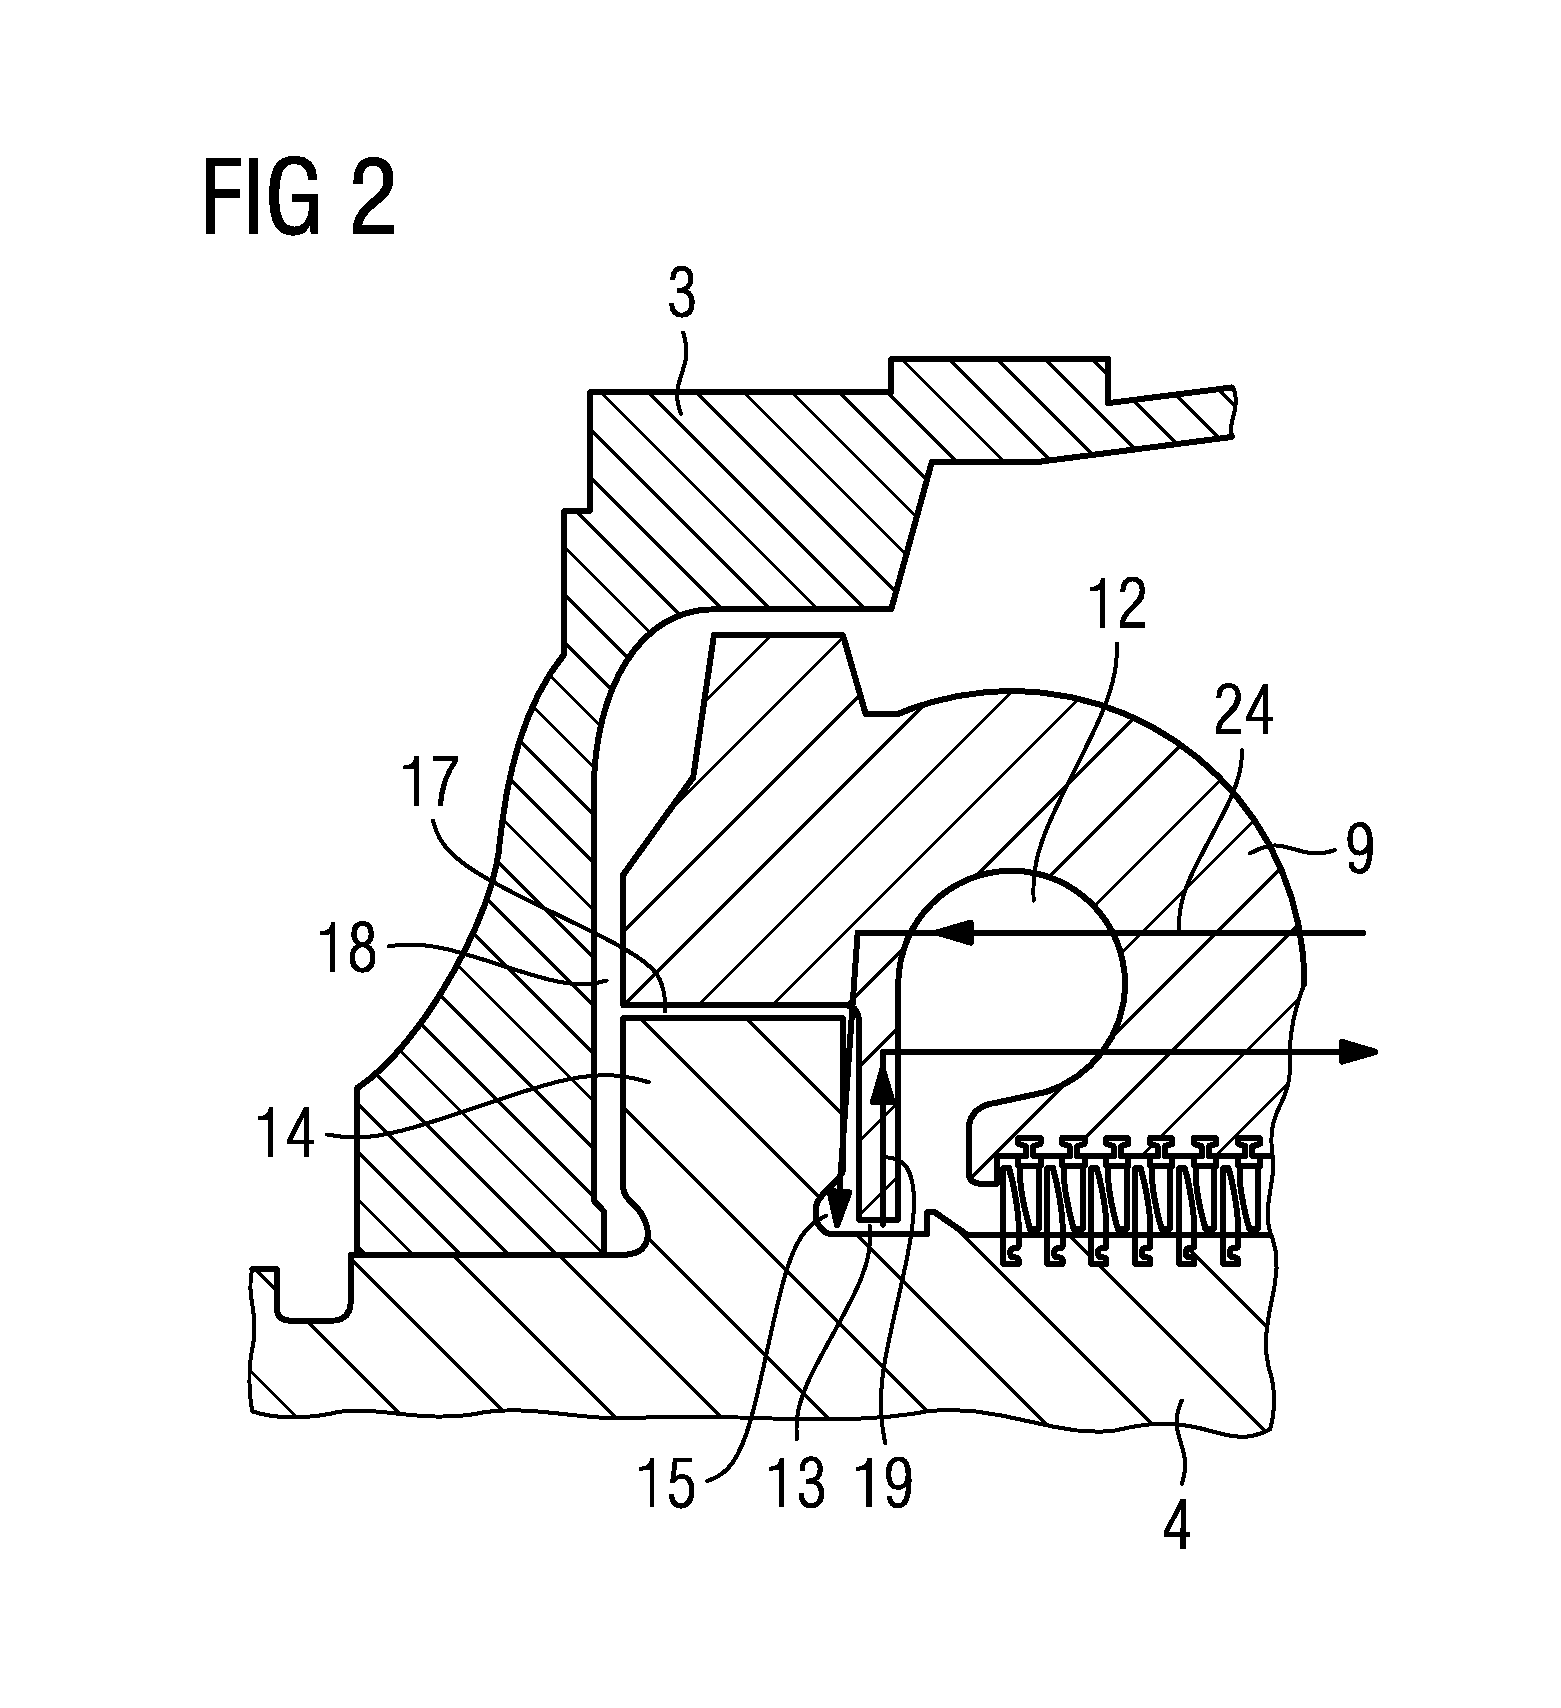 Disabling circuit in steam turbines for shutting off saturated steam